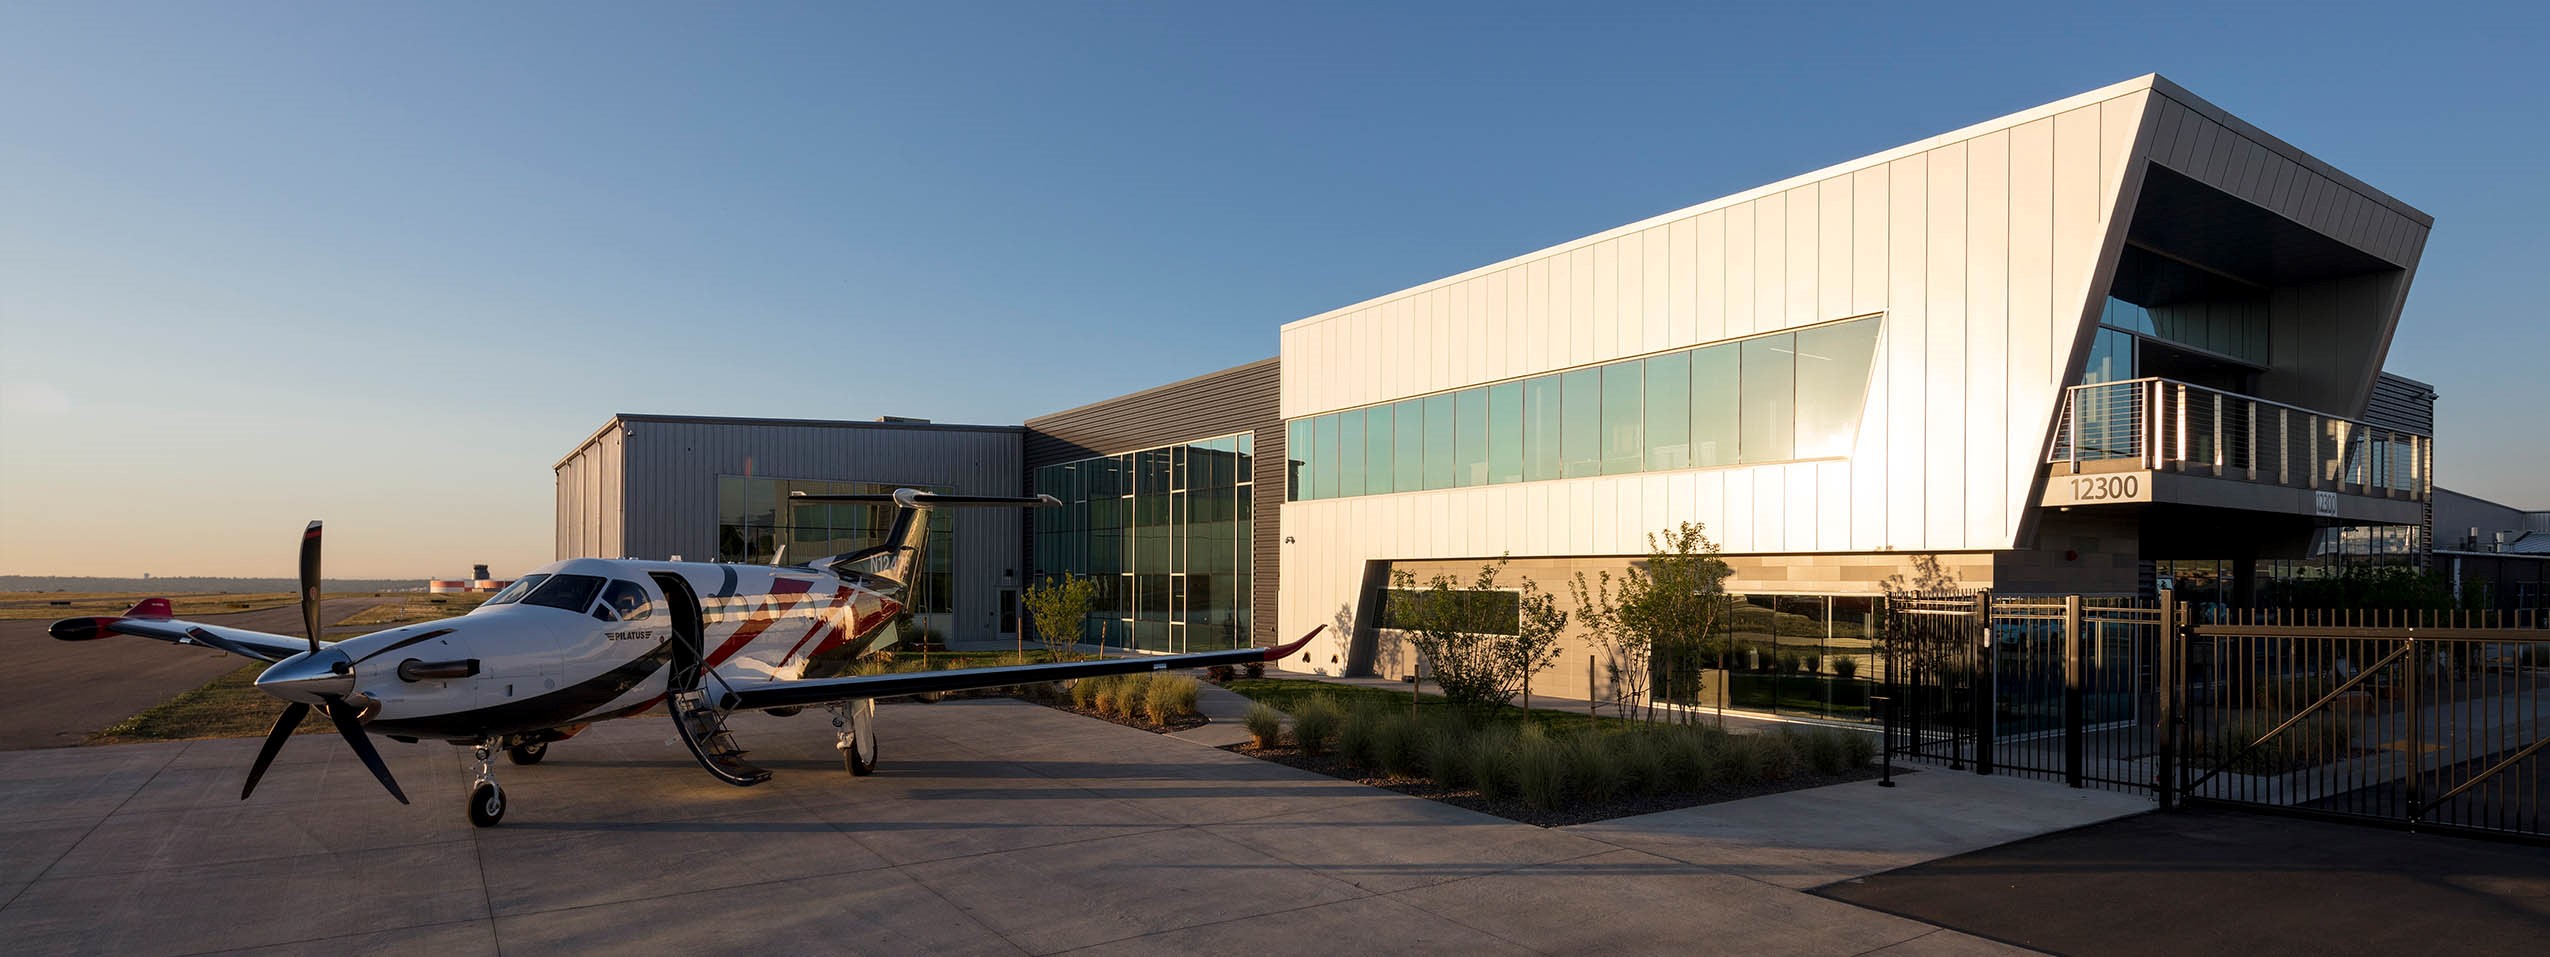 Pilatus Opens New PC-12 NG and PC-24 US Completions Facility in Broomfield, Colorado | JetAv News